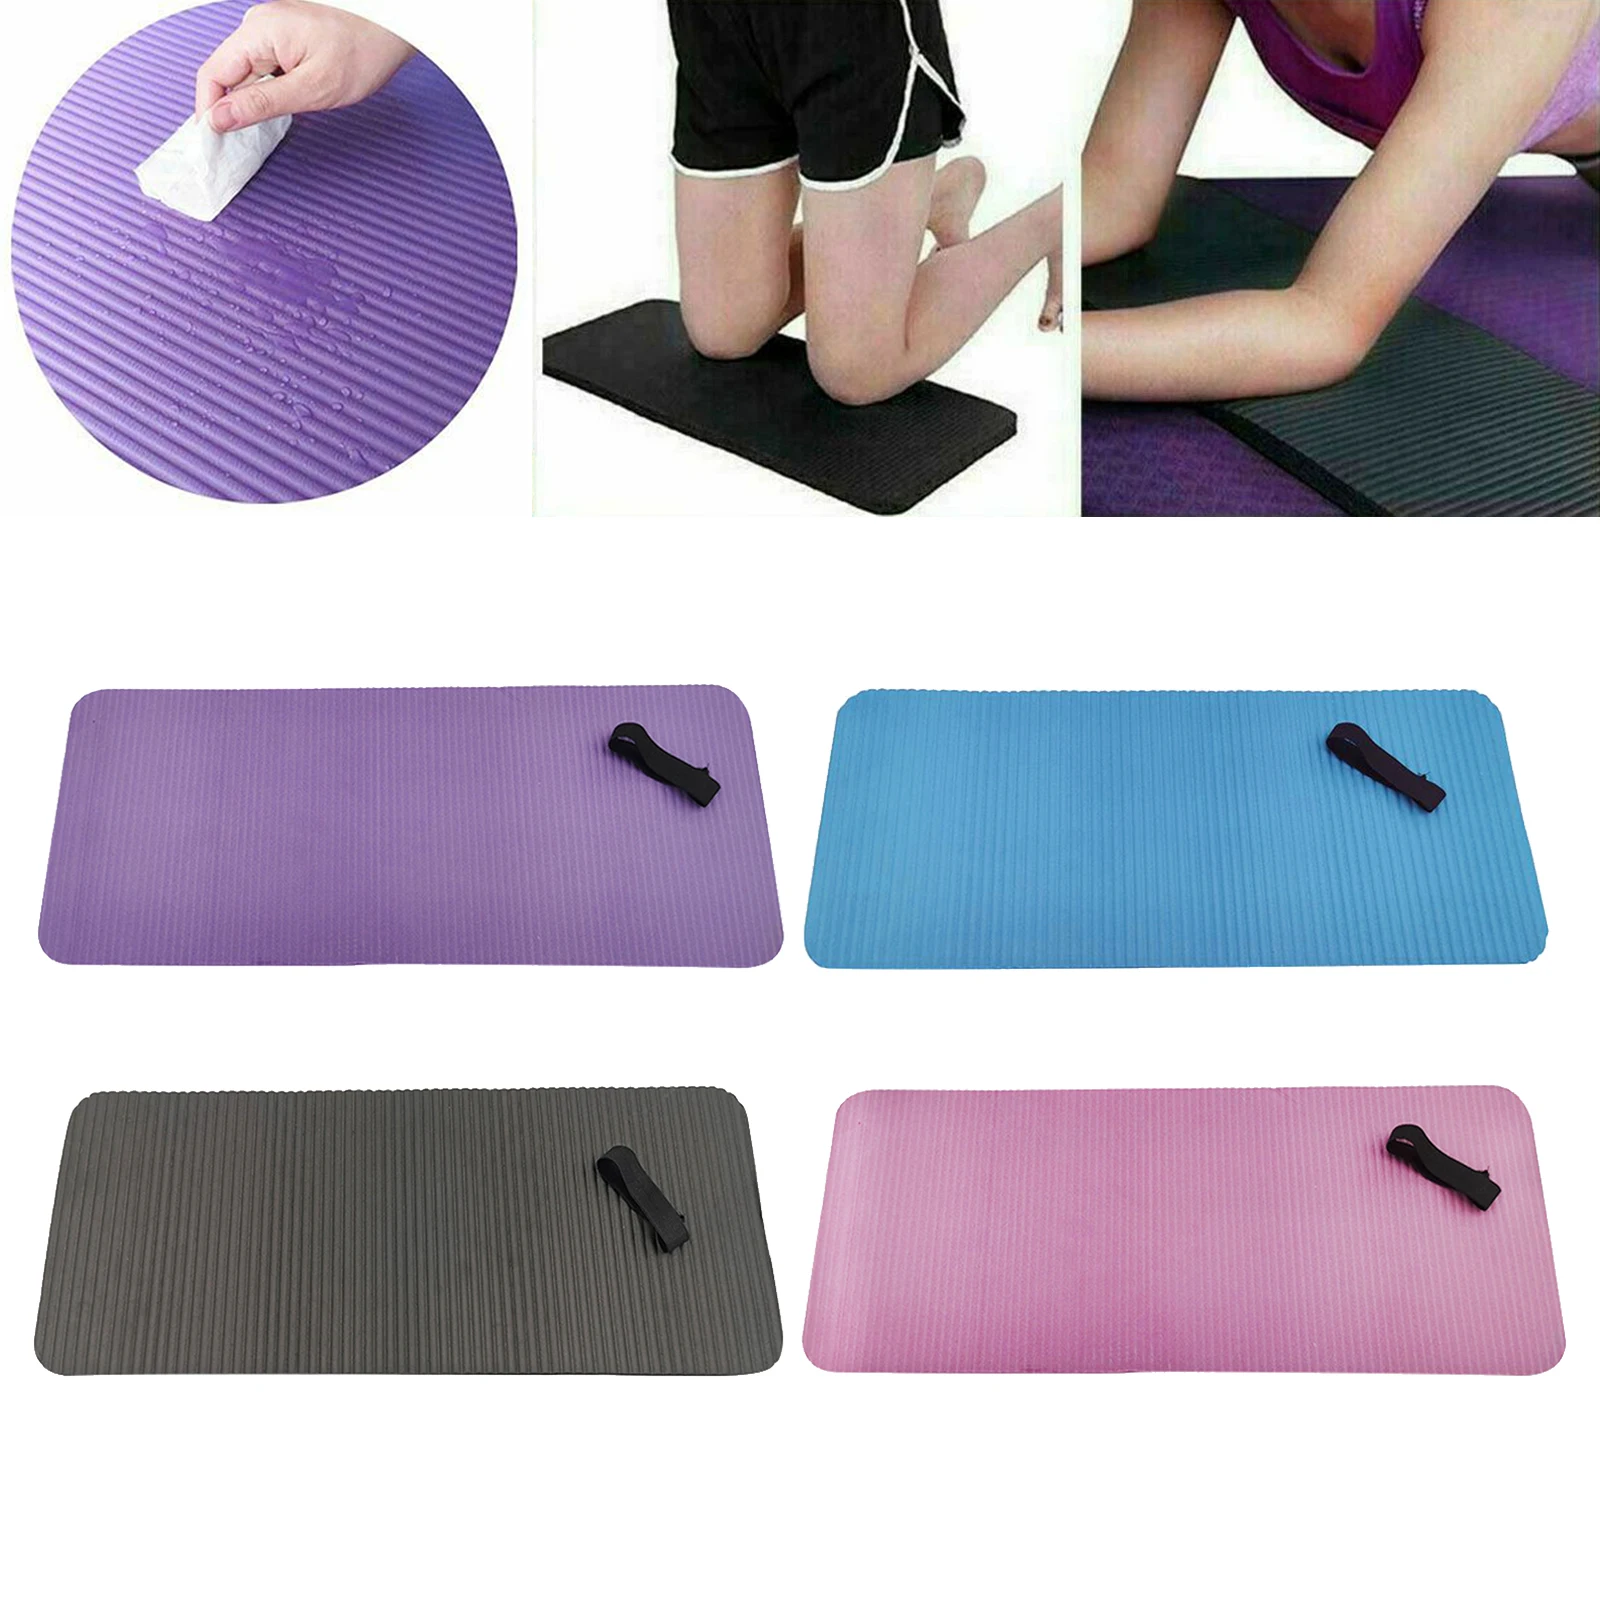 Compact Exercise Pad for Knee Yoga Knee Pad Elbow and Wrist Comfort, 